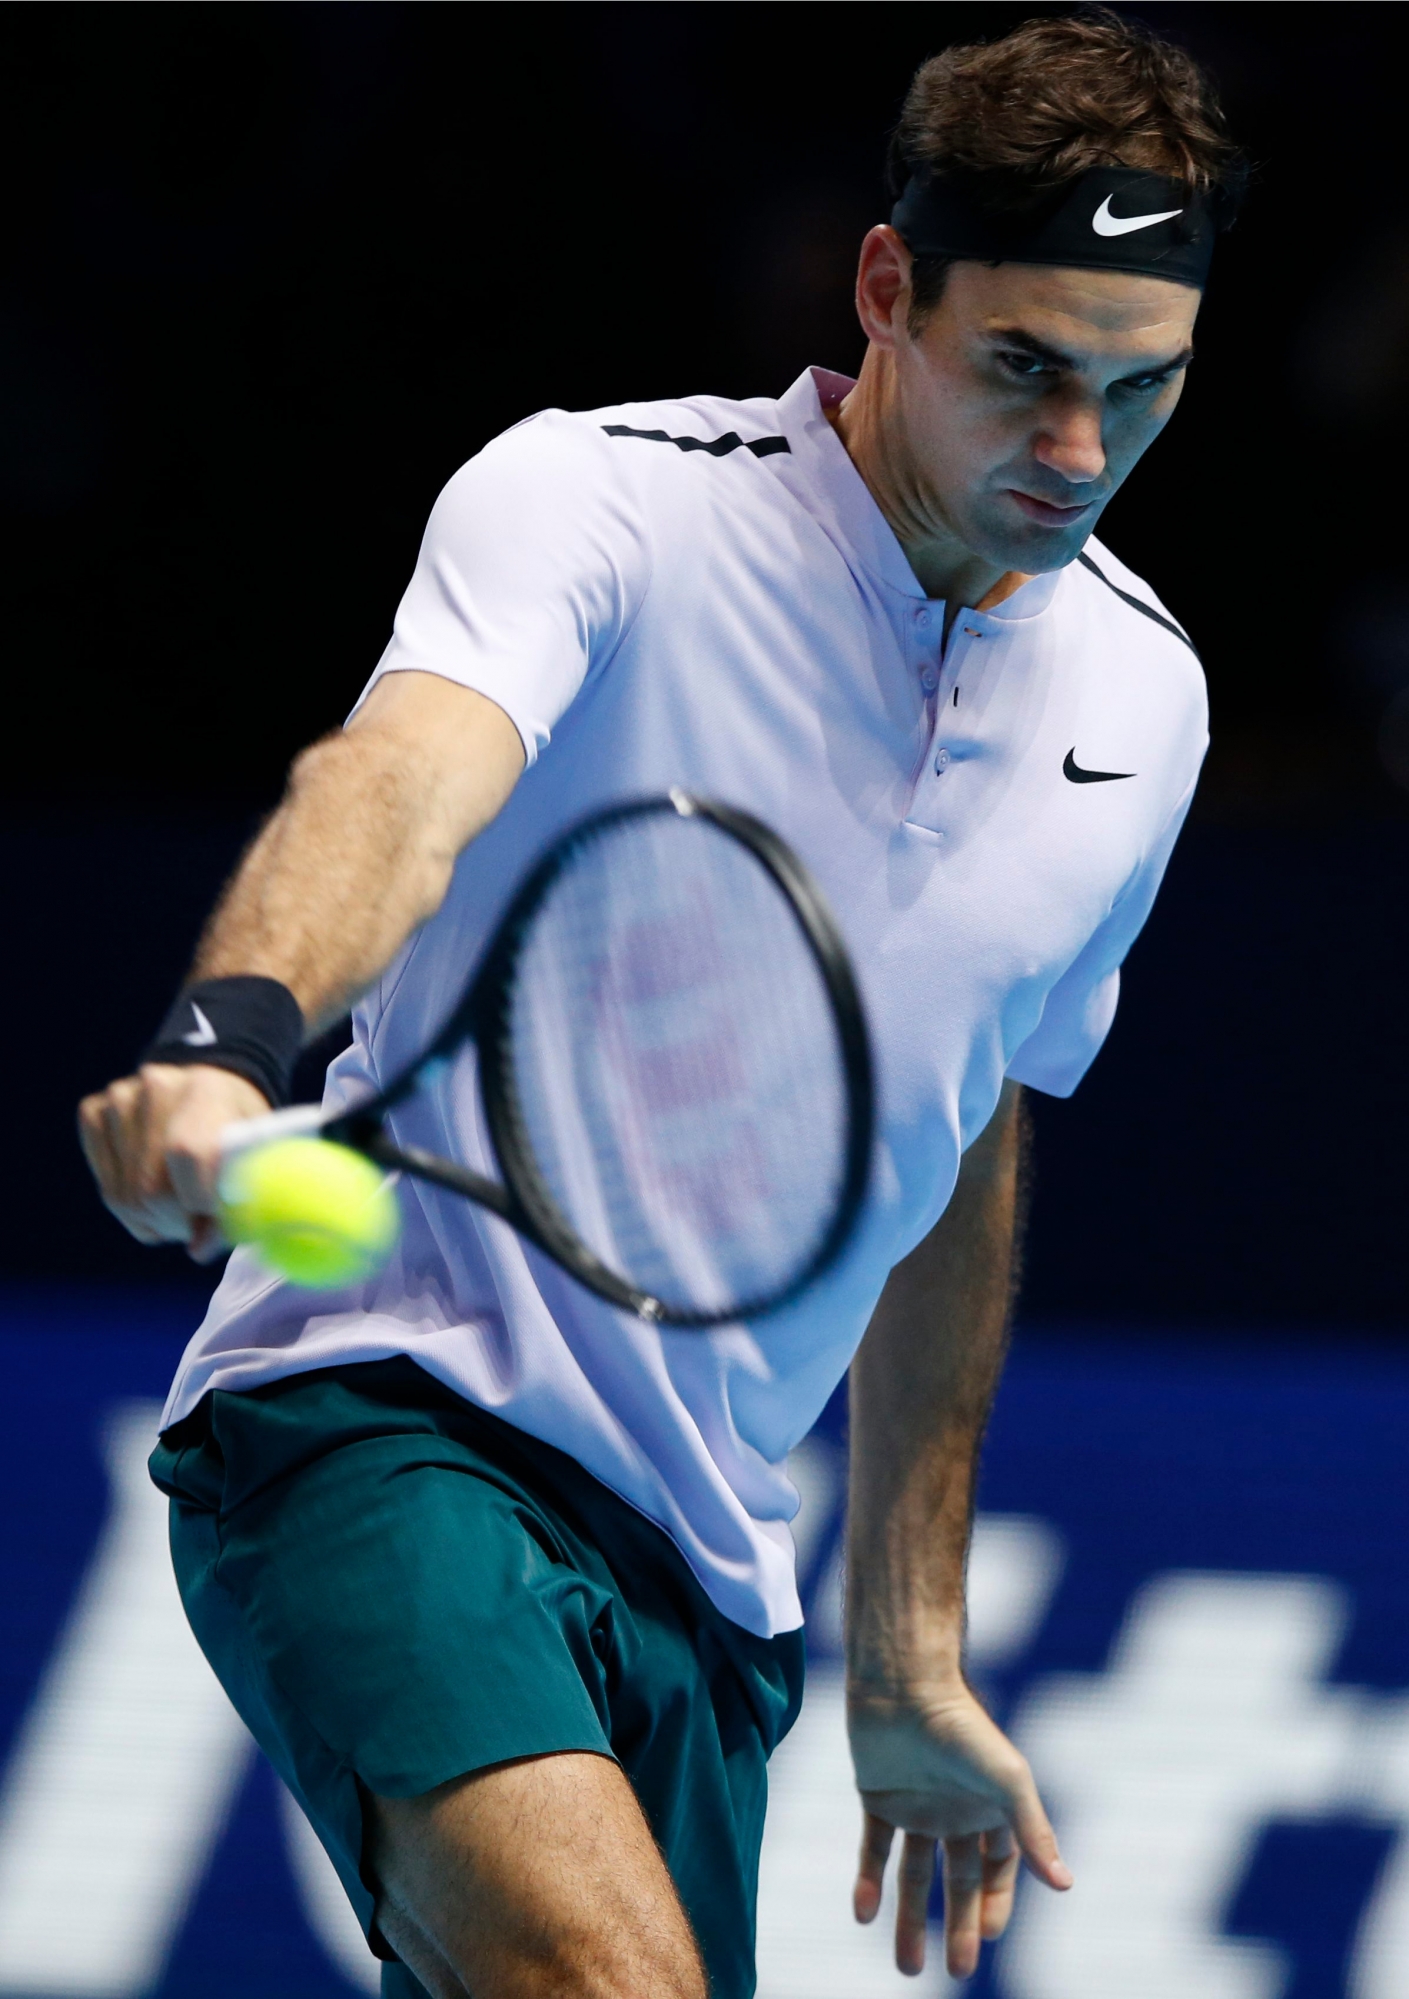 Roger Federer of Switzerland plays a return to Marin Cilic of Croatia during their mens singles match at the ATP World Finals at the O2 Arena in London, Thursday, Nov. 16, 2017. (AP Photo/Alastair Grant) BRITAIN TENNIS ATP FINALS